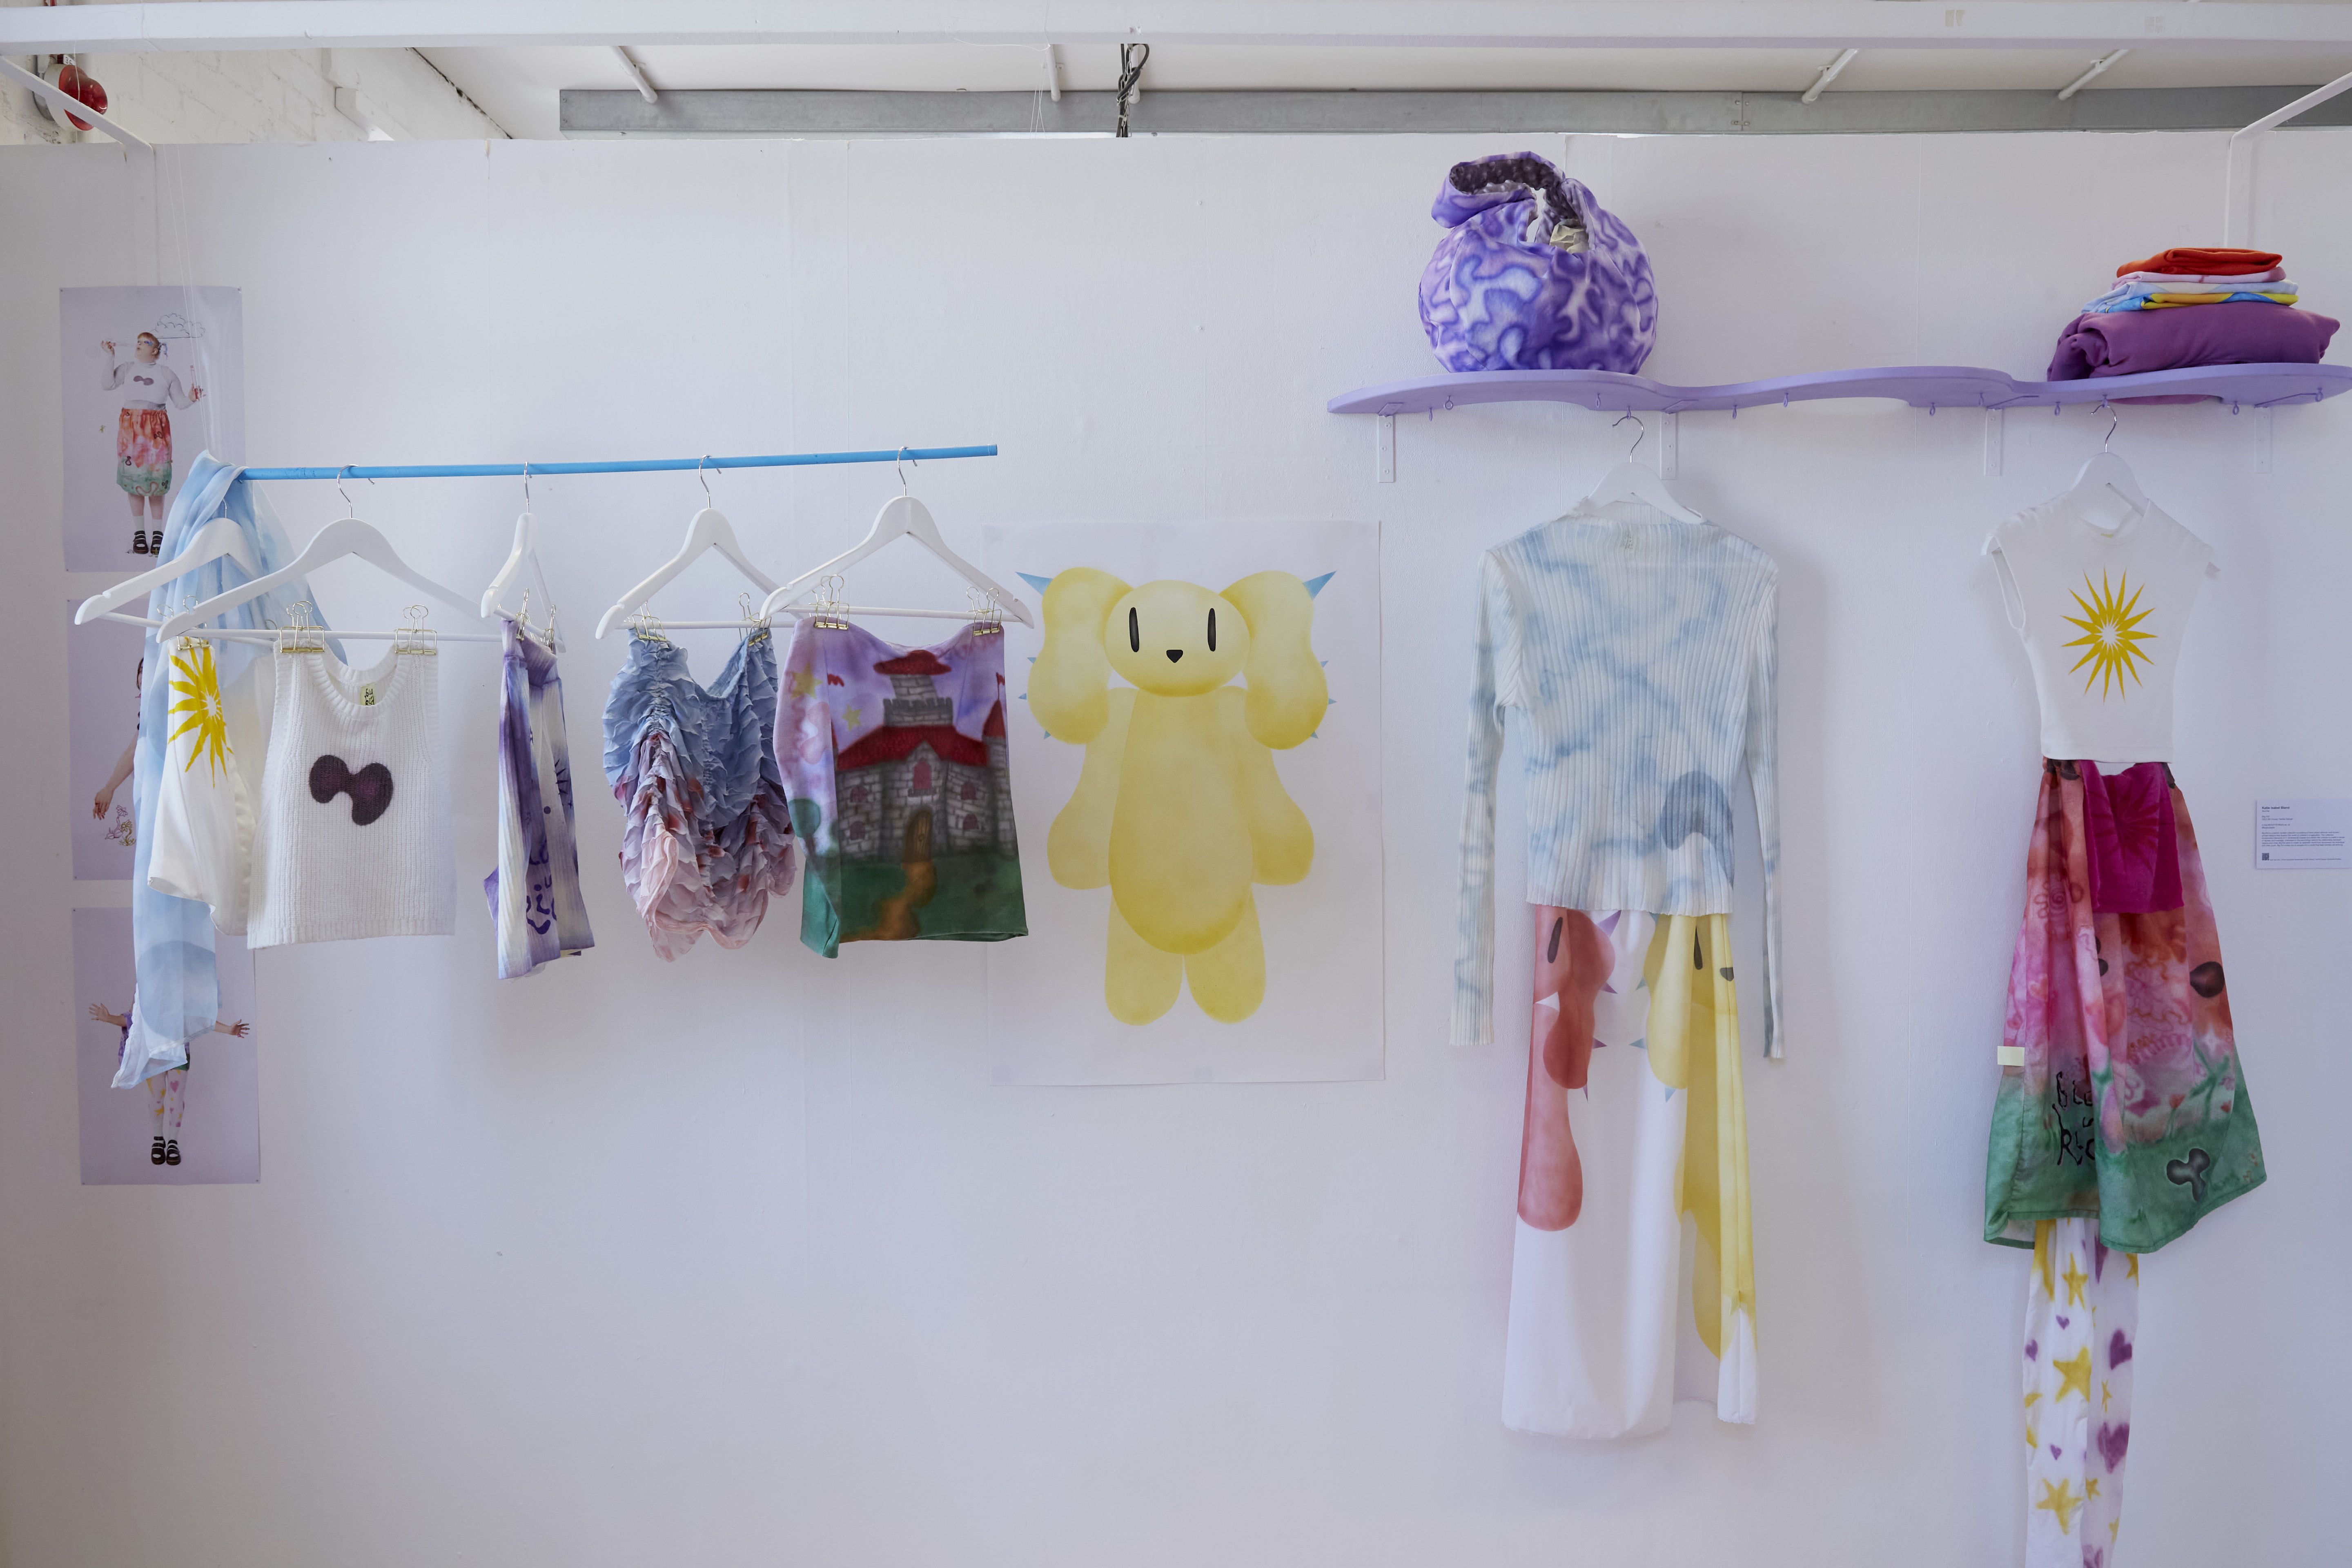 Image shows a series of pastel coloured items of clothing hanging against a white wall.